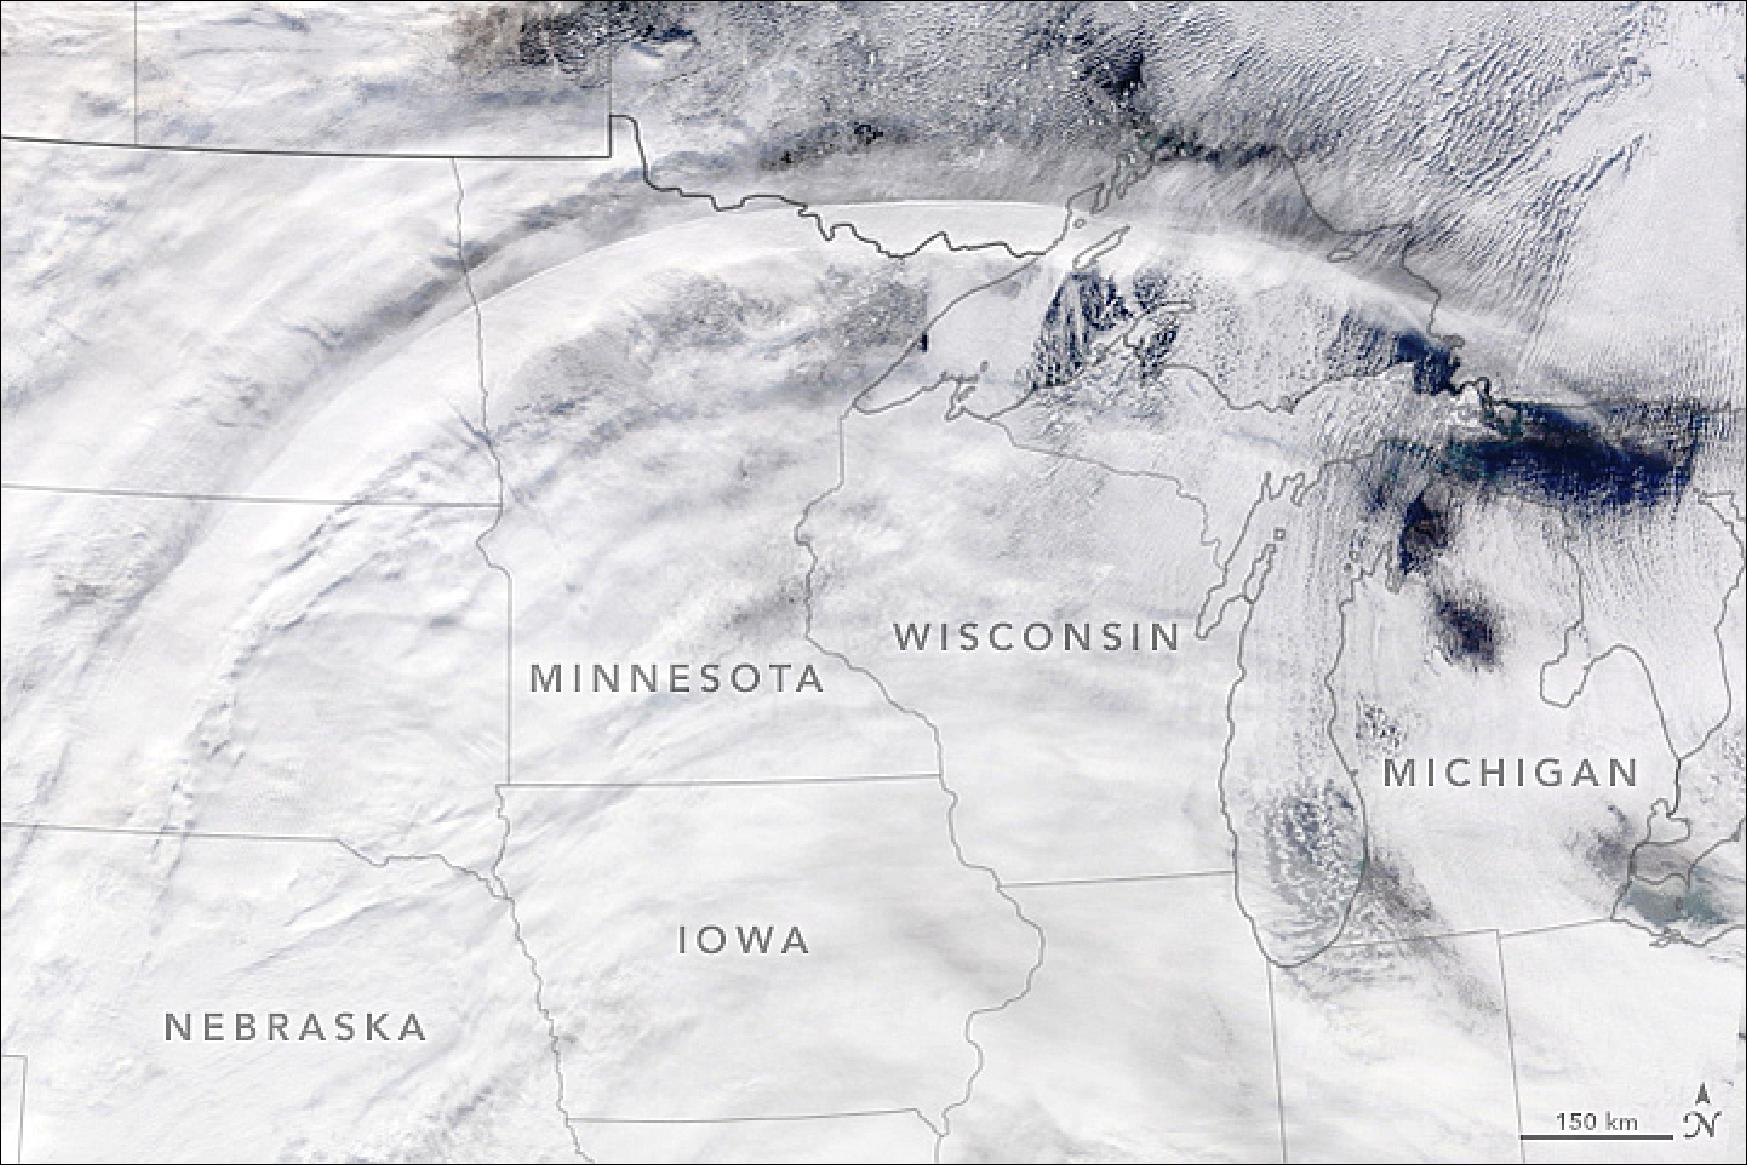 Figure 8: Circulation around a jet streak—a fast-moving pocket of air within the jet stream—formed this distinctive arc of clouds. The presence of a jet streak is not often apparent in natural-color satellite imagery, but occasionally there are tell-tale signs. That was the case on November 28, 2019, when the MODIS instrument on NASA’s Terra satellite captured this image of a wide arc of clouds stretching across the northern United States. At the time, a powerful winter storm was building in the East (image credit: NASA Earth Observatory, image by Lauren Dauphin, using MODIS data from NASA EOSDIS/LANCE and GIBS/Worldview. Story by Adam Voiland)